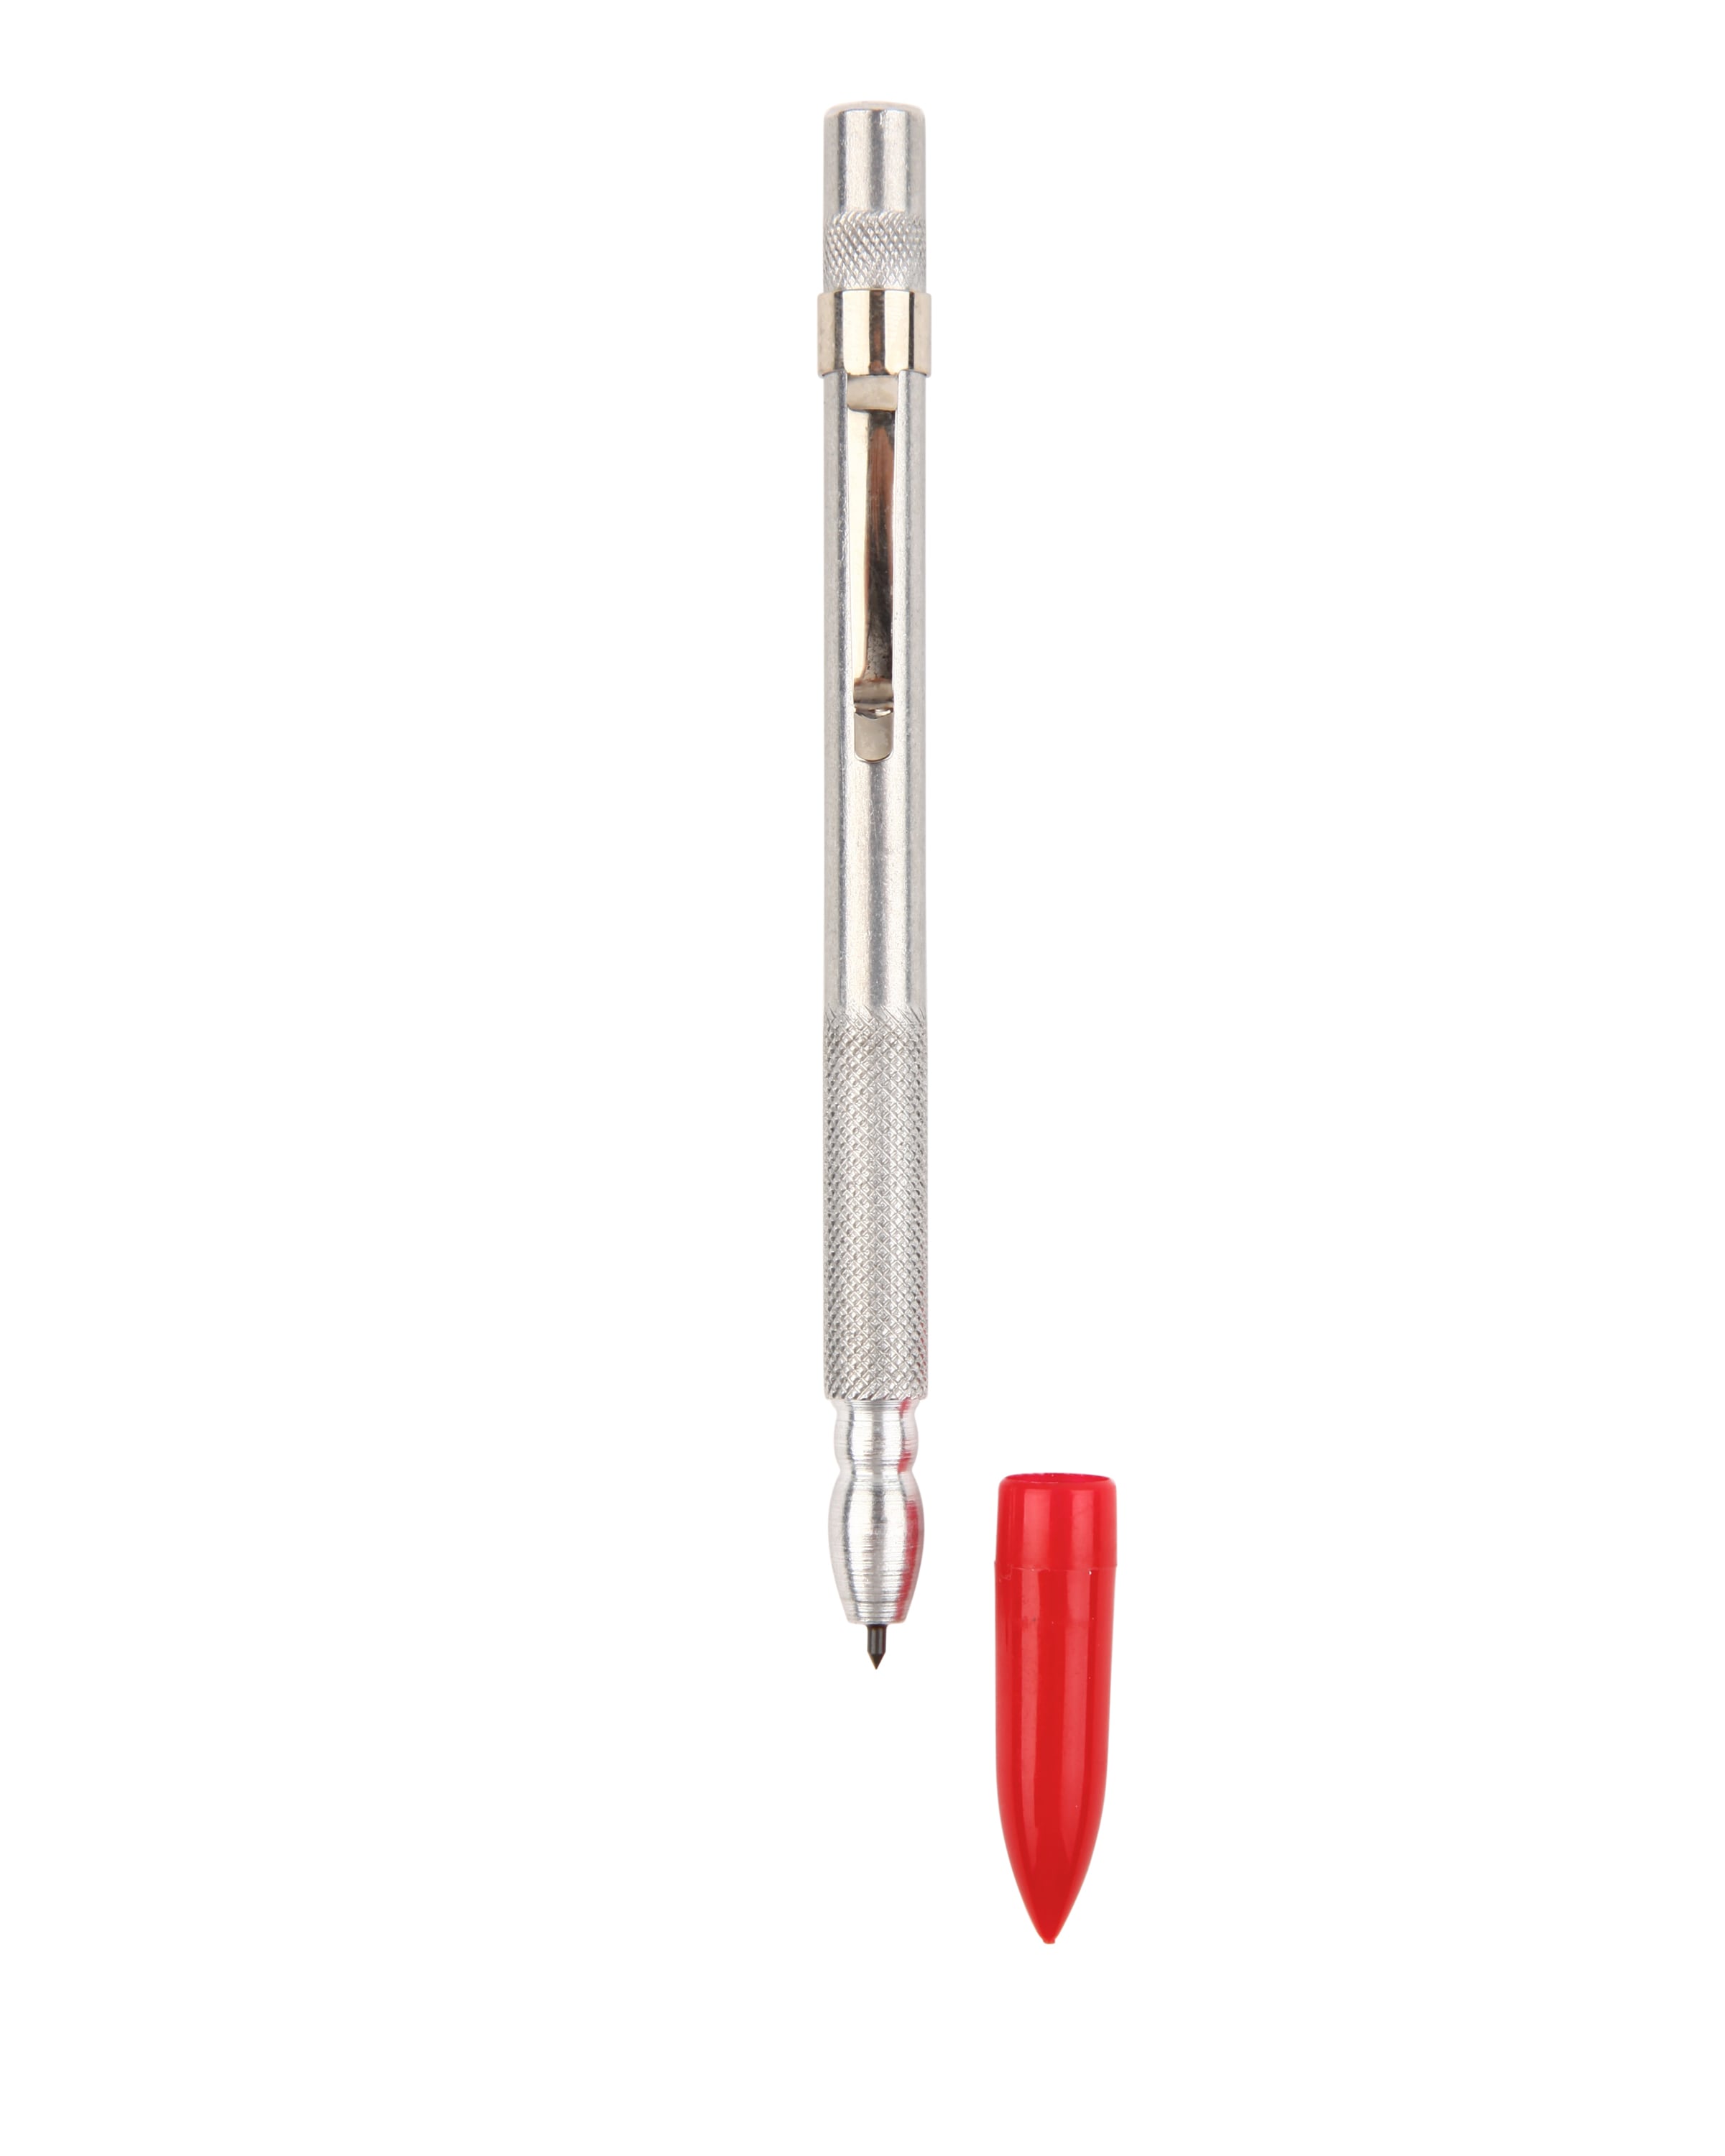 Tungsten Carbide Tip Scribe Pen for Welding, Marking on Metal, Glass and  Plastic